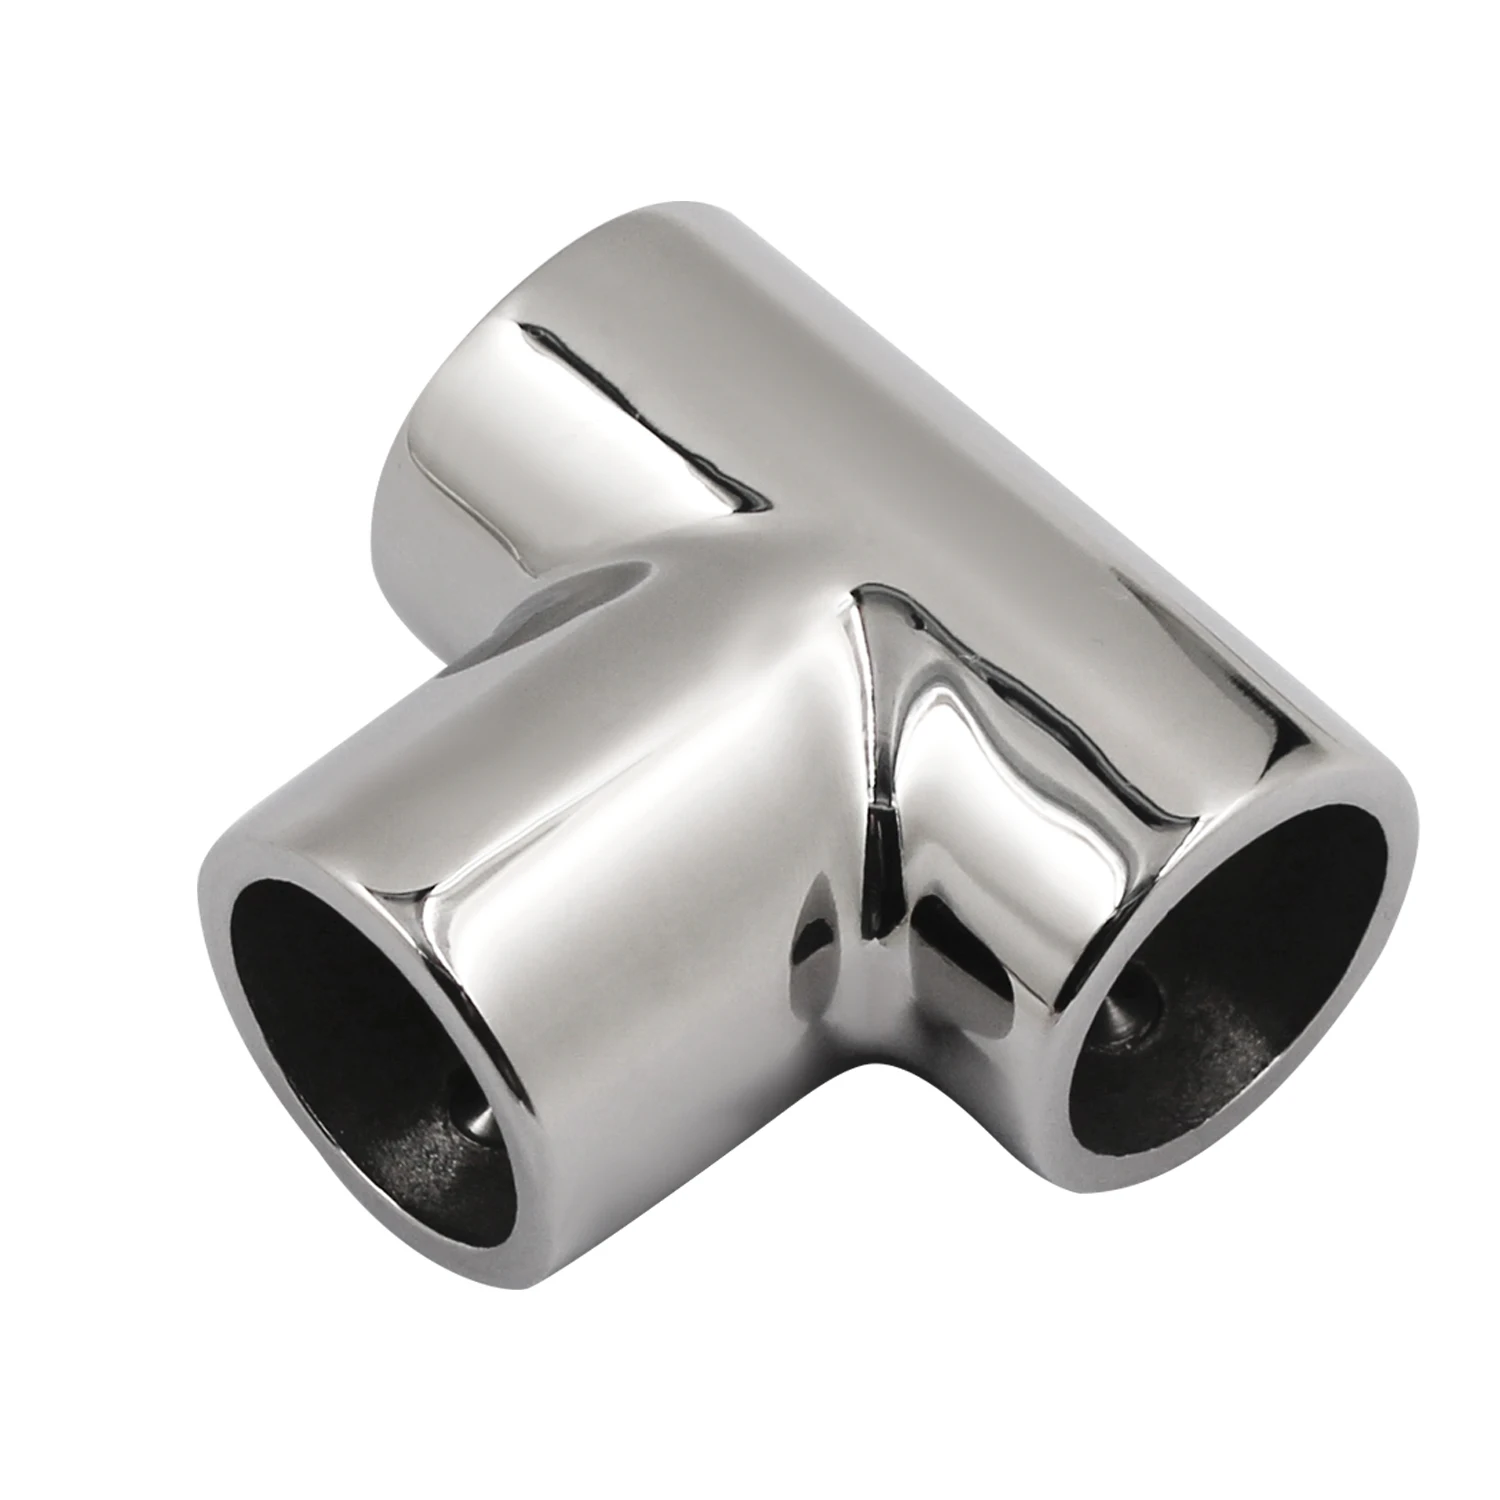 2 Pcs Stainless Steel 316 Marine Boat 3 Way Handrail Fitting 90° Deck Hand Rail Tee Joint Connector for 22mm/25mm Tube/Pipe enlarge